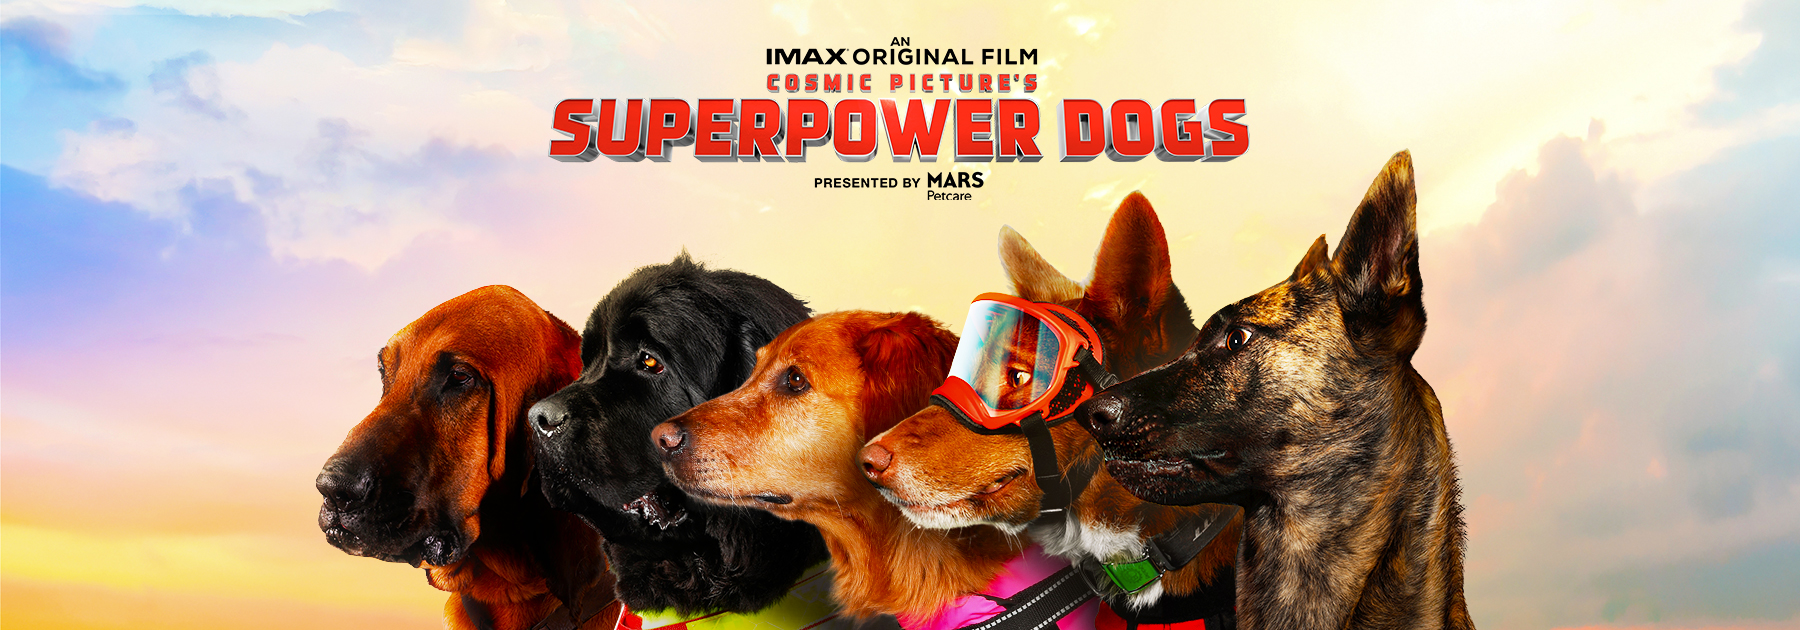 Promotional image from the omnimax film superpower dogs